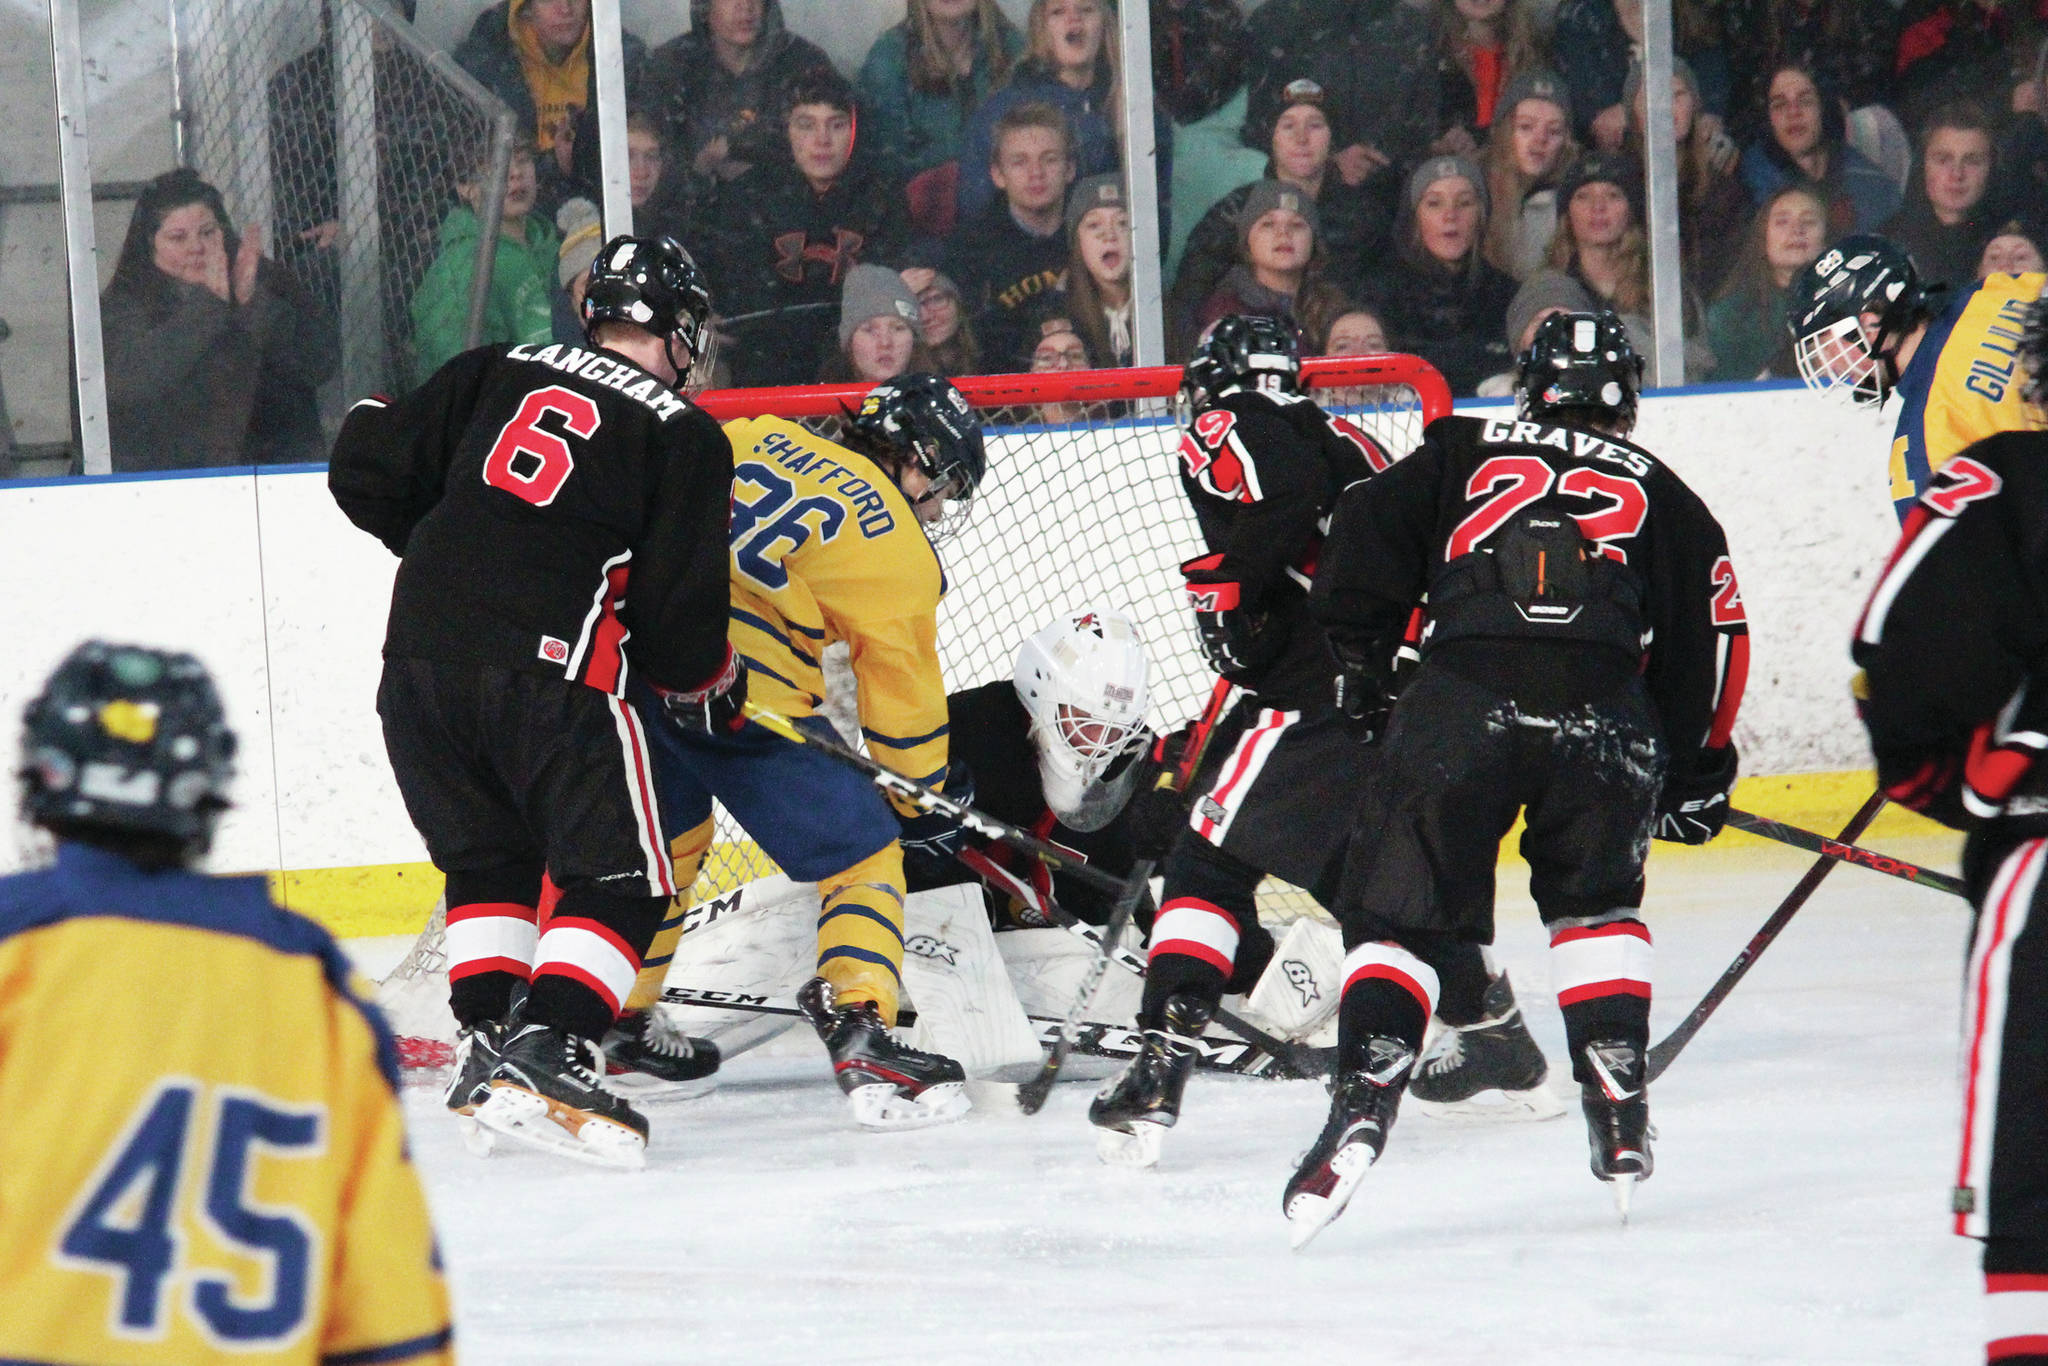 Homer’s Austin Shafford tries to force the puck into the net amid a crowd of Kenai defenders during a Saturday, Nov. 23, 2019 hockey game at Kevin Bell Arena in Homer, Alaska. (Photo by Megan Pacer/Homer News)